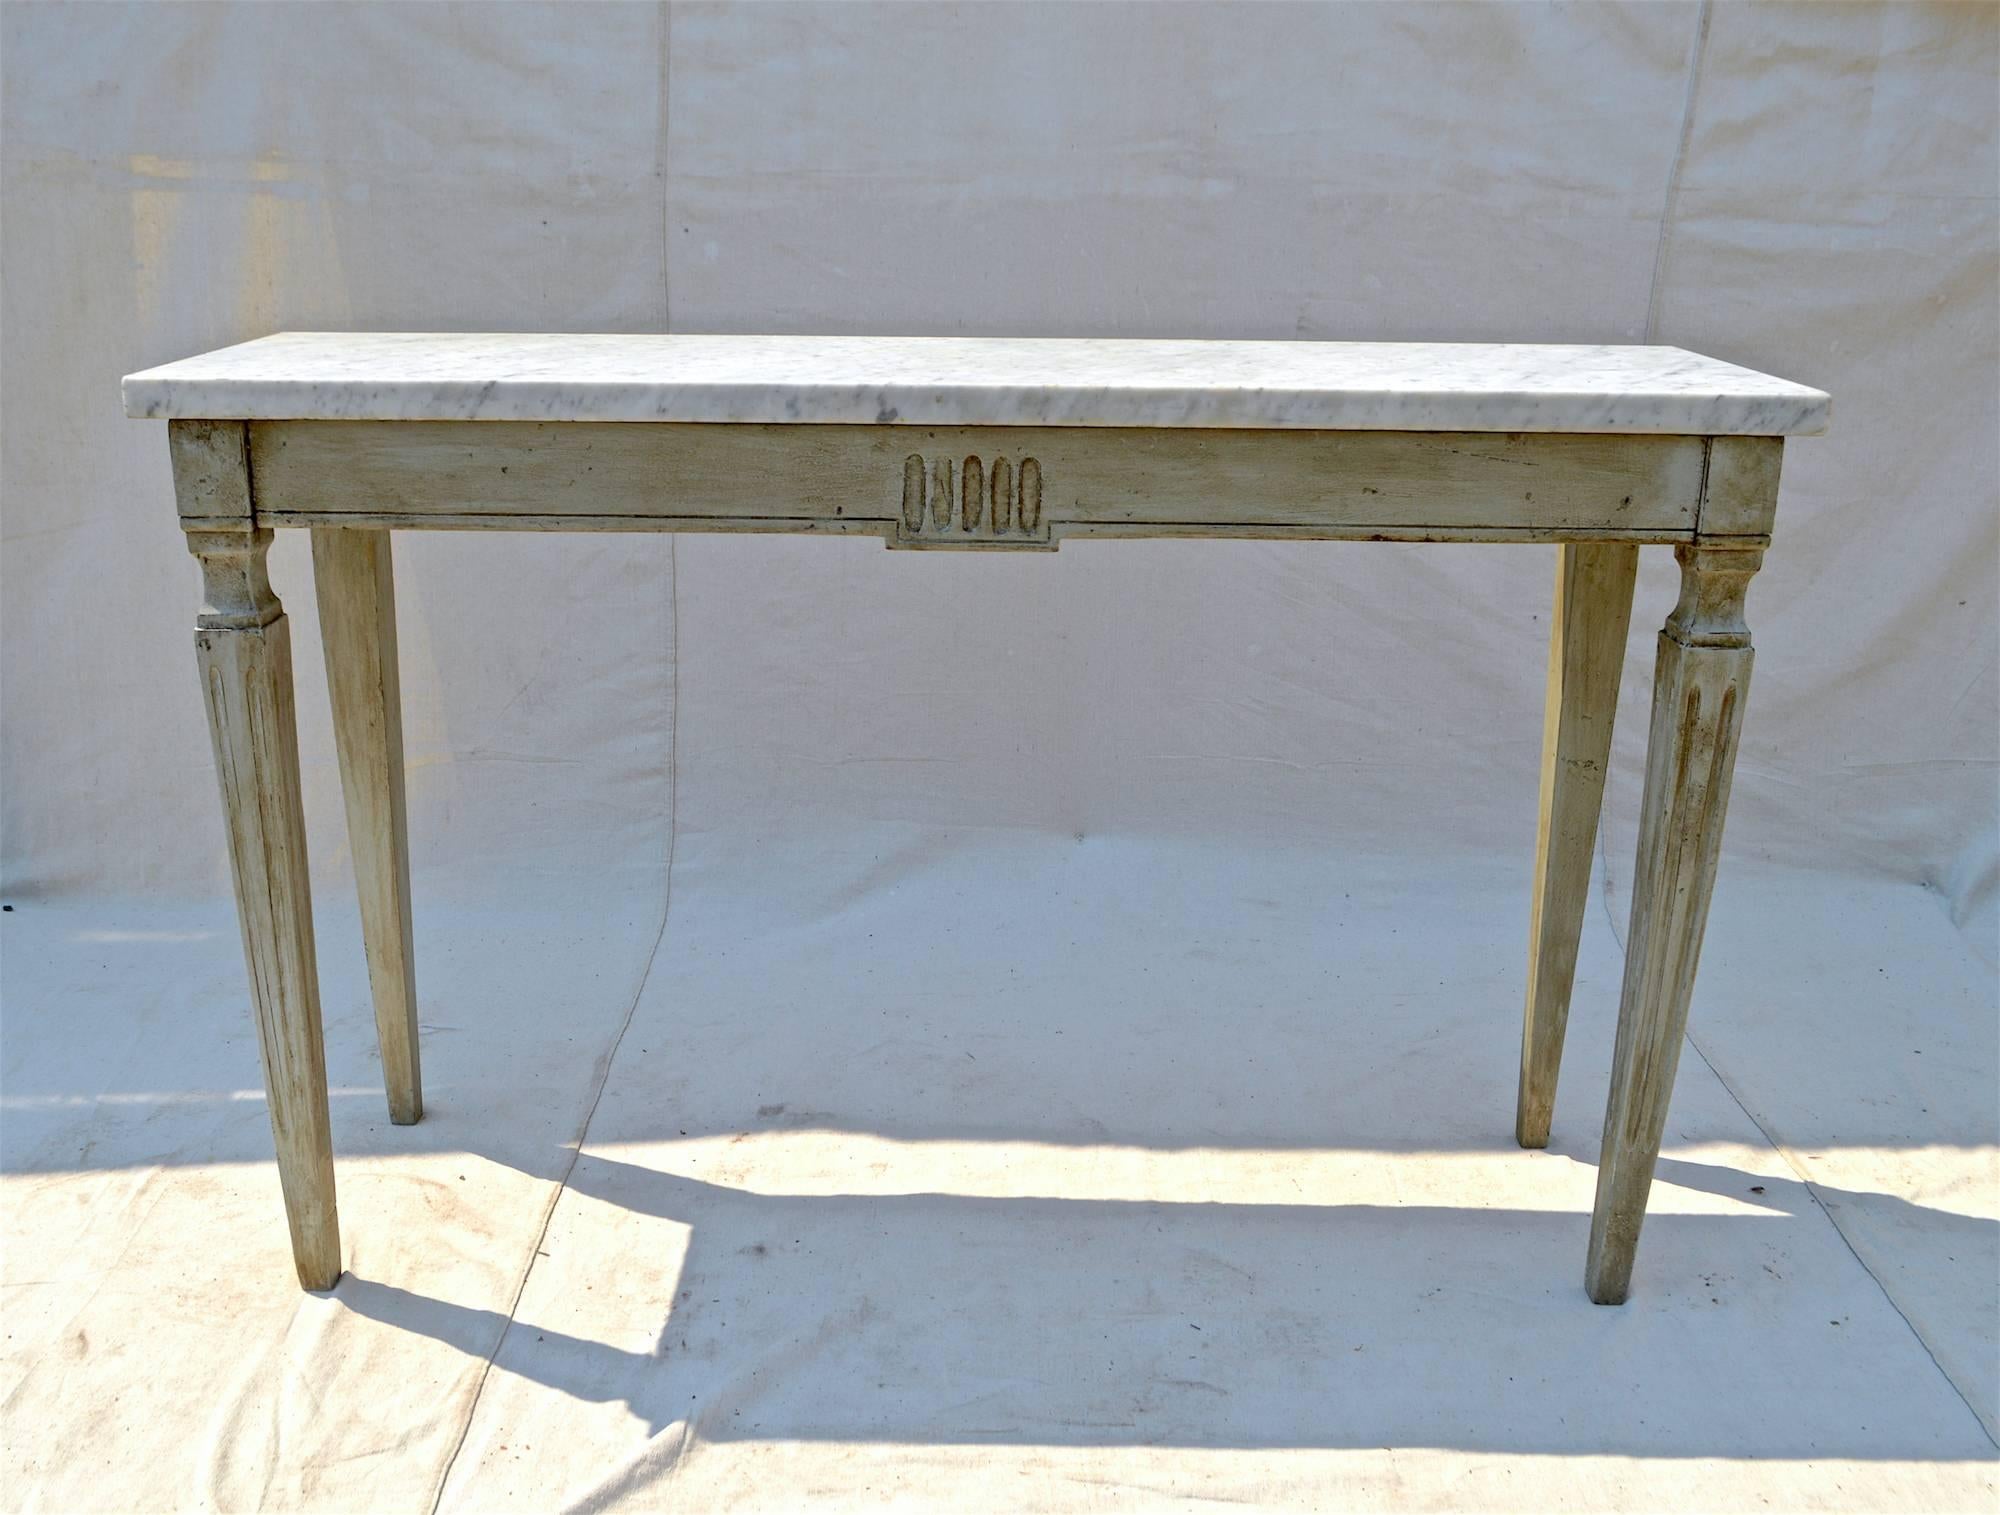 A simple and classic French styled marble top console table in the Neoclassical taste. Warm toned Carrara marble rest upon a rectangular apron having turned and stop reeded front legs and a strong and supportive tapering back leg. The body of the